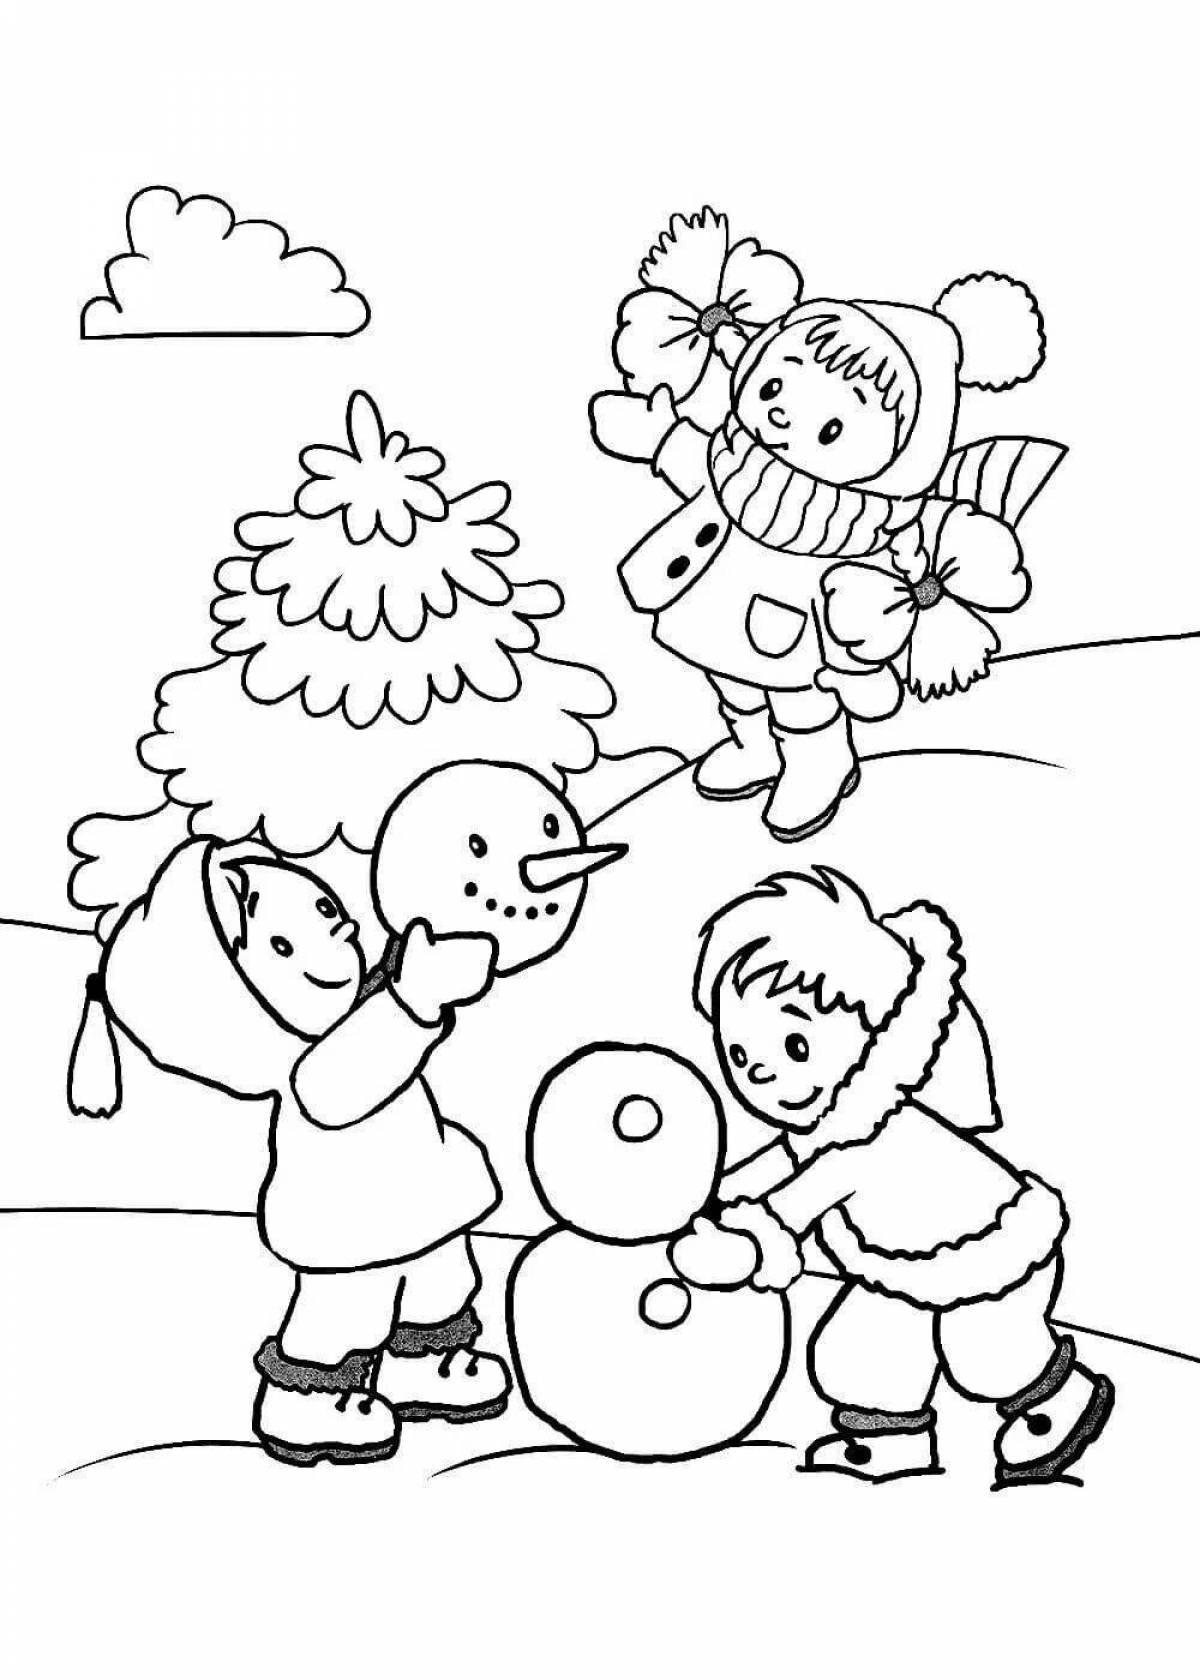 Live coloring winter for children 8 years old